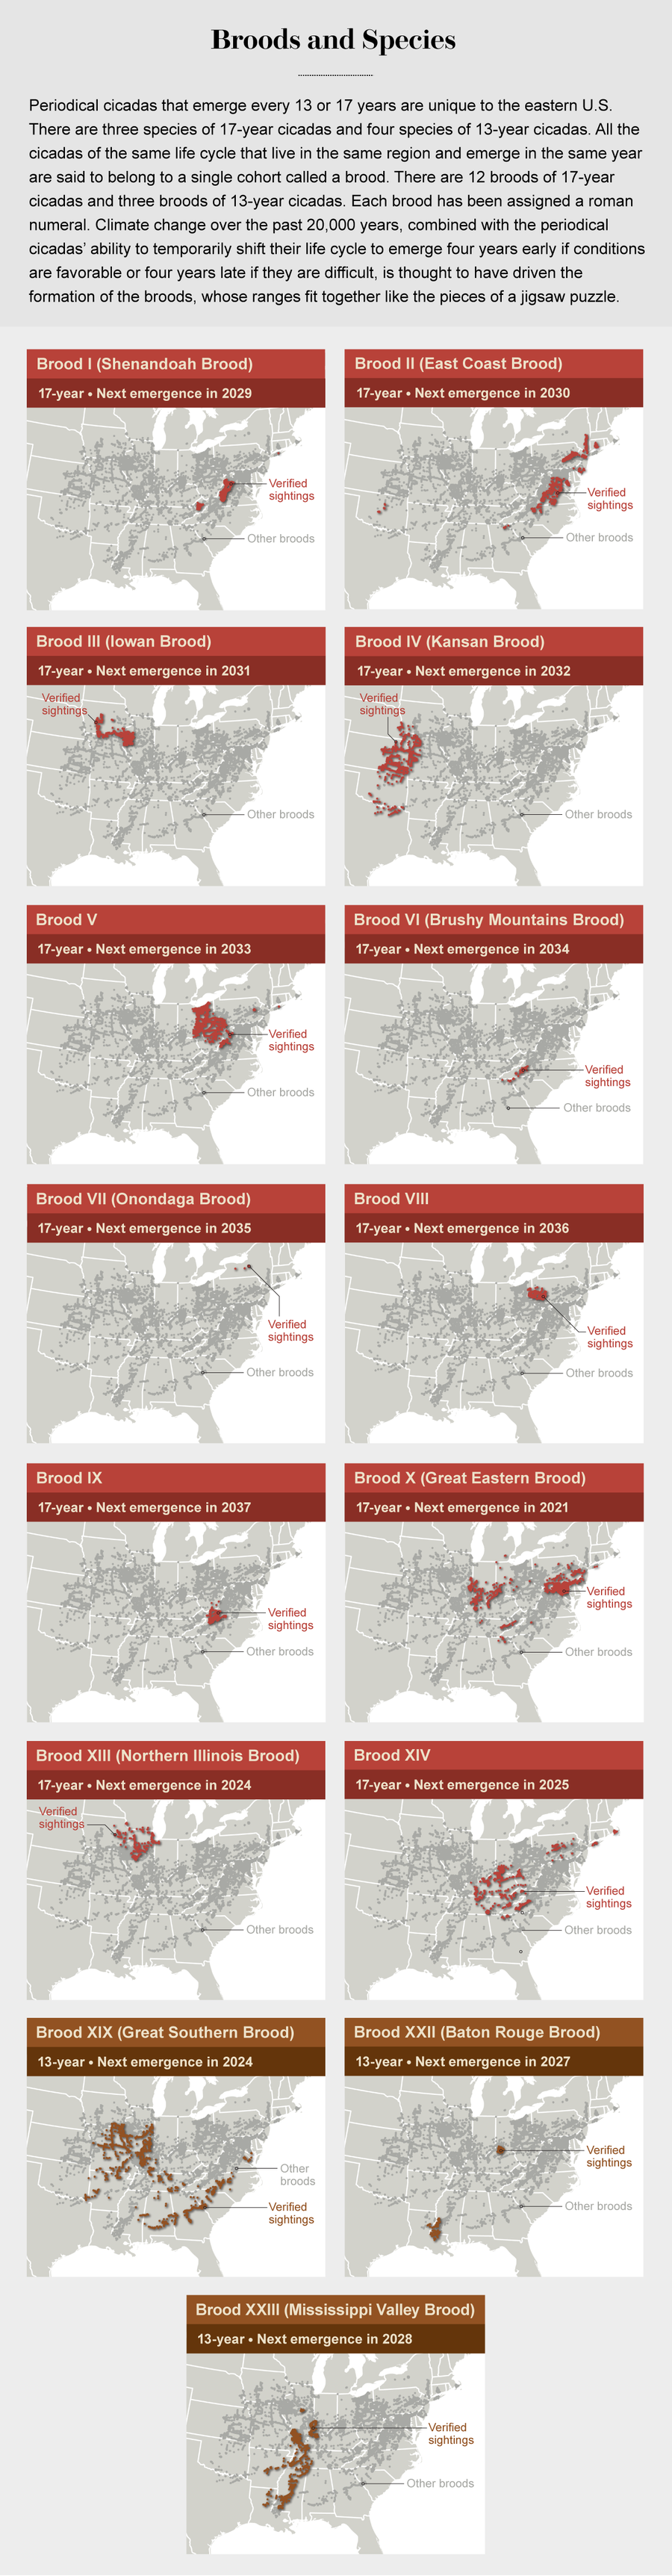 Series of maps shows the geographical ranges of 12 17-year broods and three 13-year broods of cicadas in the U.S.